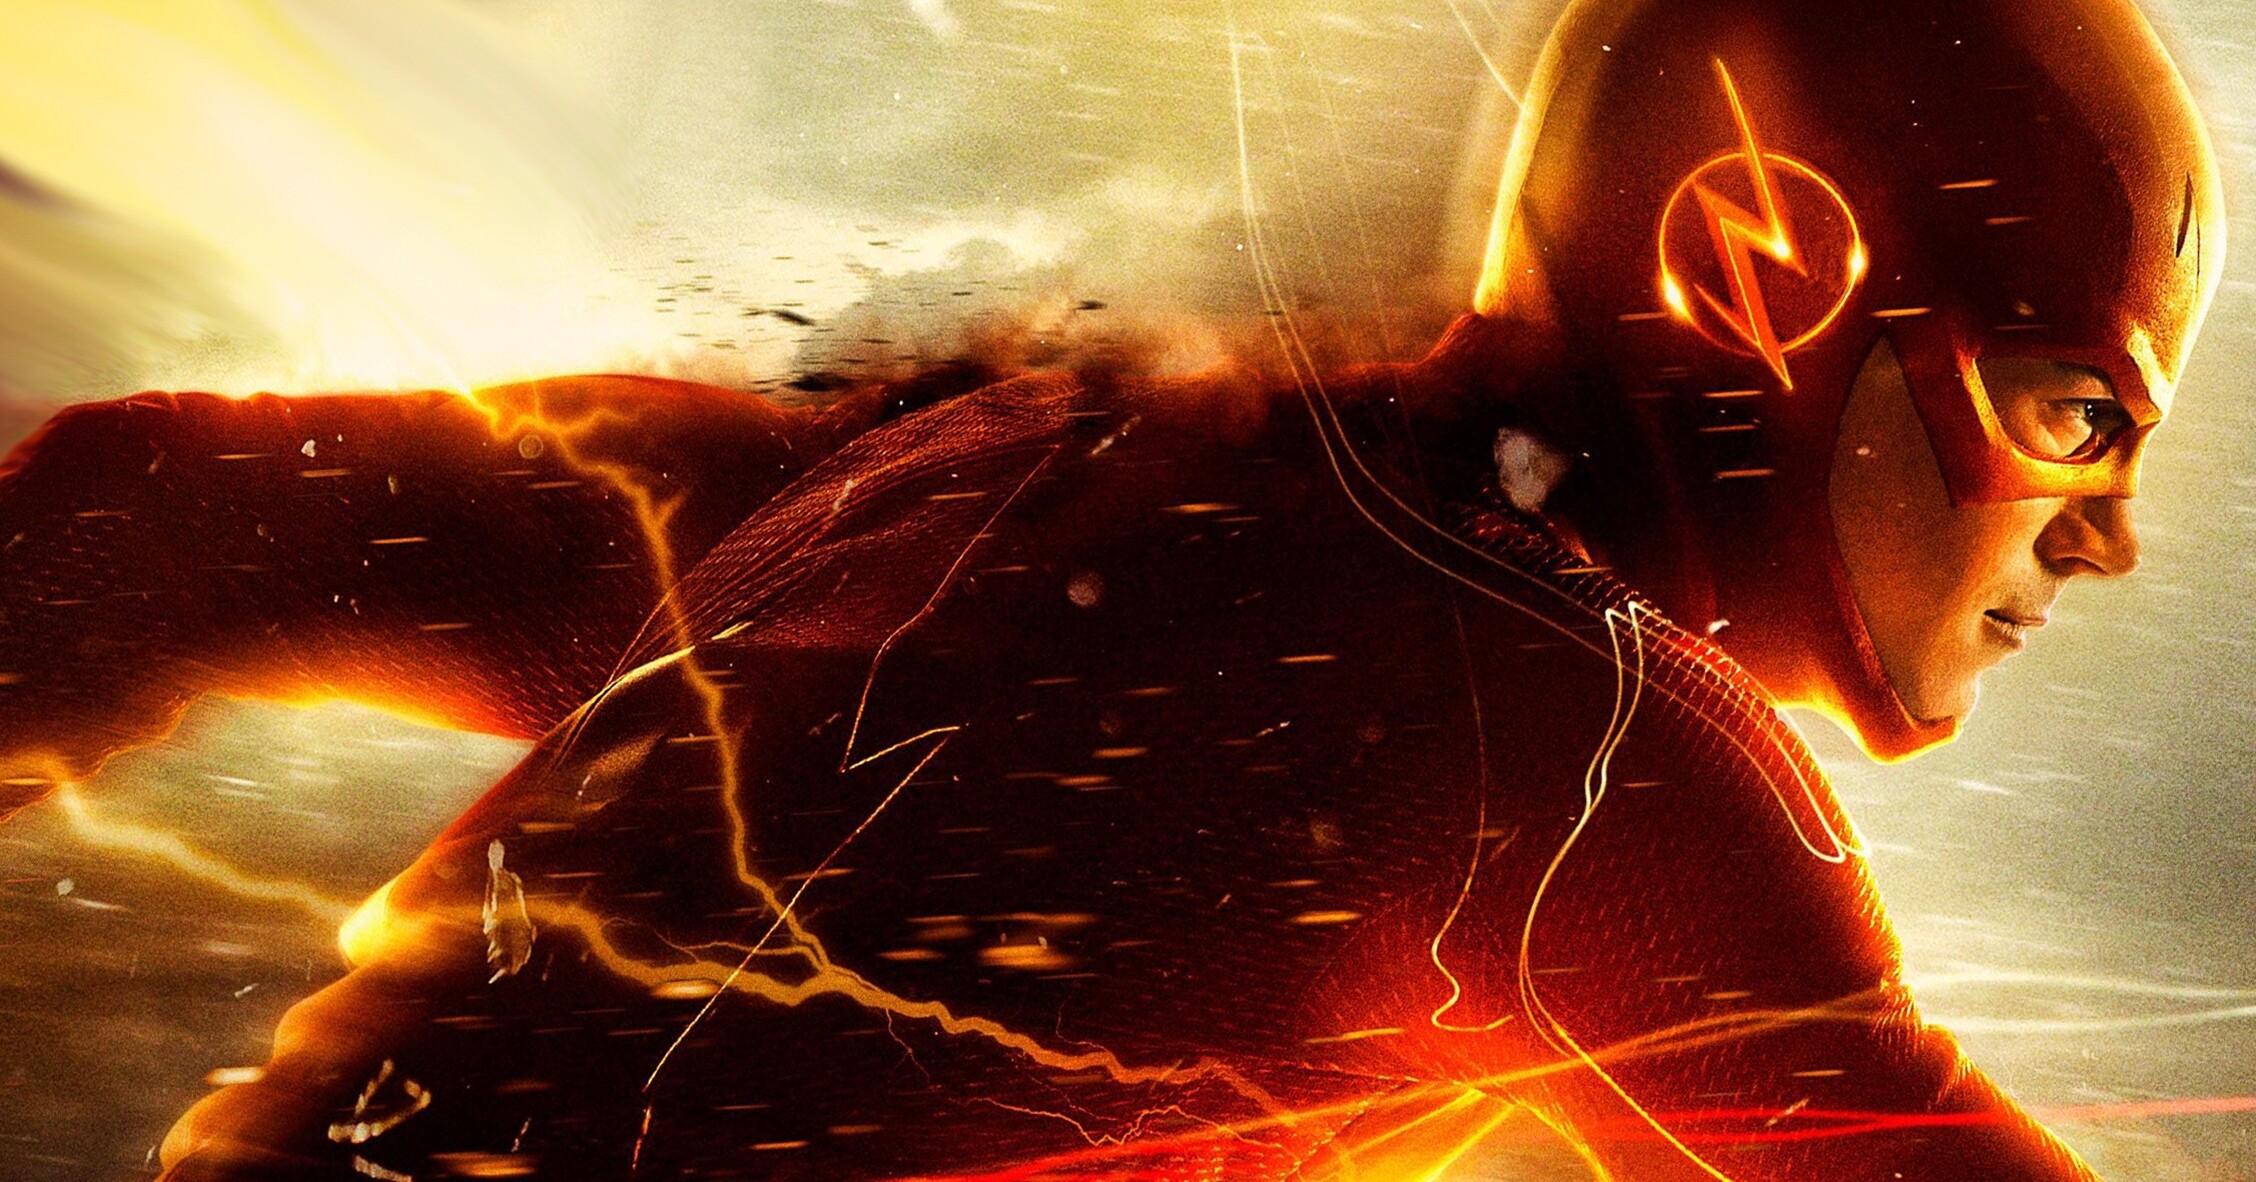 Flash (DC): Barry Allen, Able to perceive events that last less than an attosecond, and react within a femtosecond. 2260x1190 HD Wallpaper.